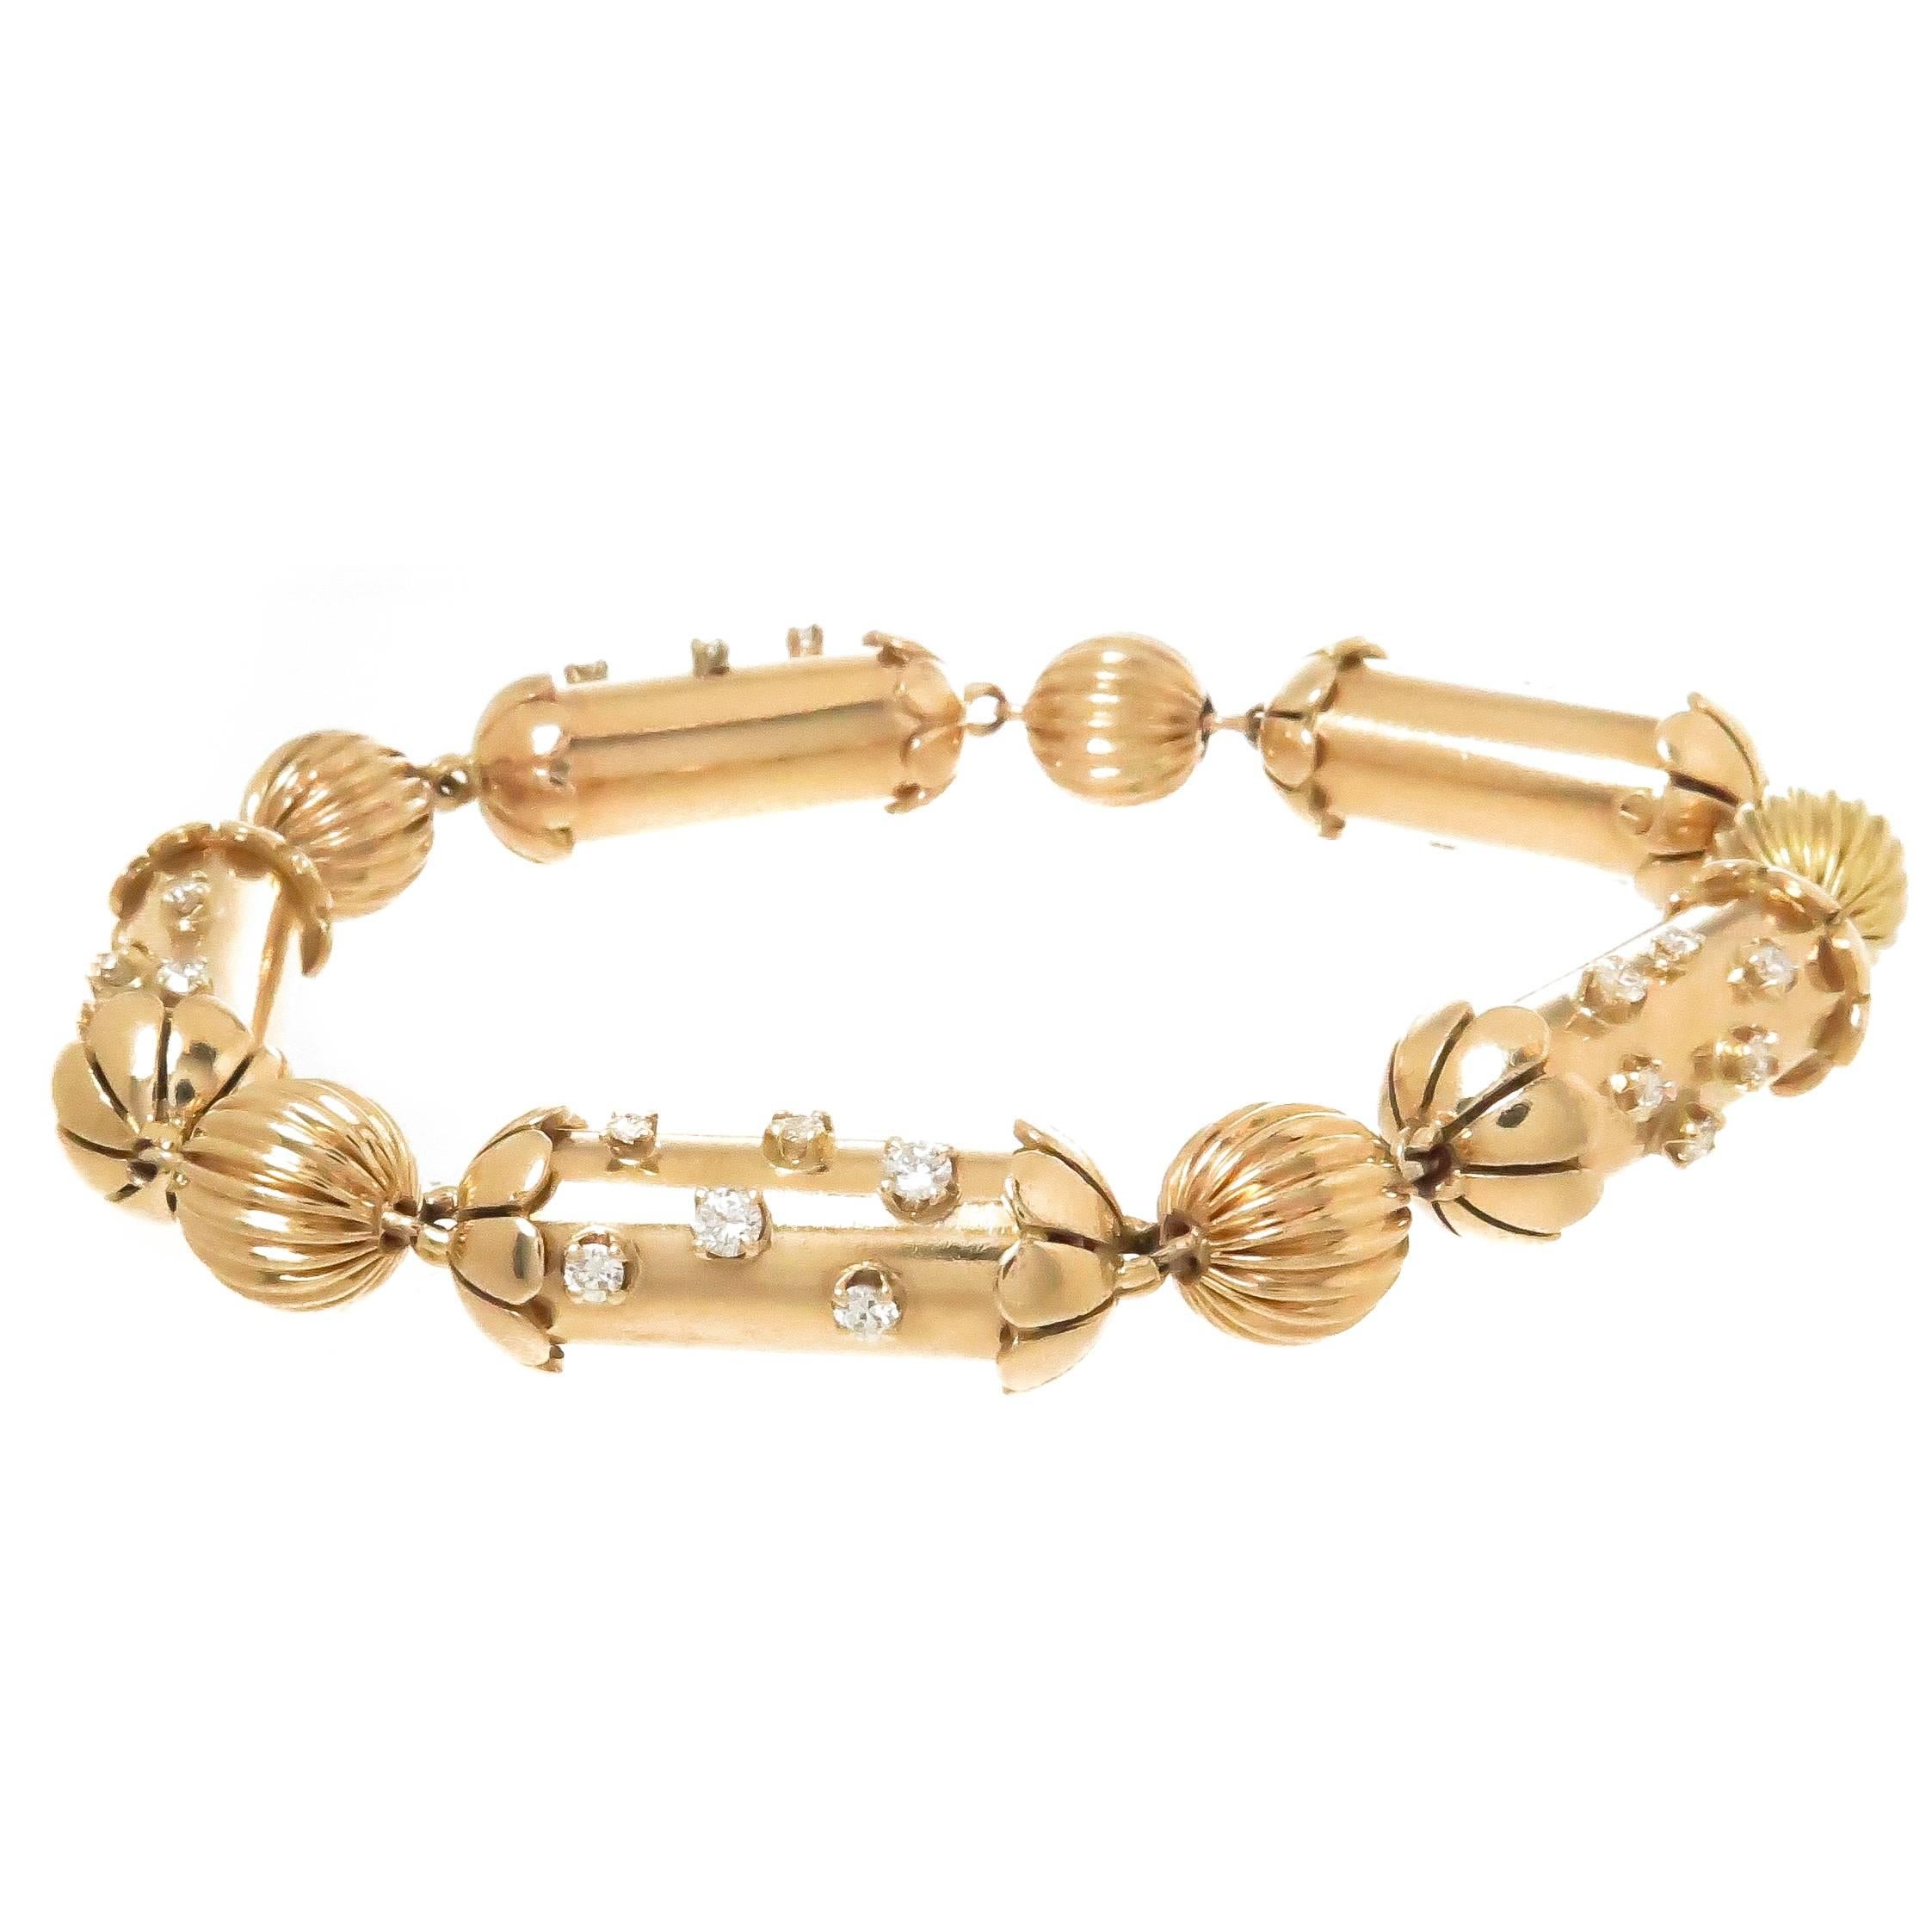 Circa 1940s set of 3 stacking flexible 14K yellow Gold link bracelets very much in the style and design of John Rubel, these 3 Bracelets have alternating Barrel links with end caps and ribbed Ball links, each is set in the Patriotic Red White and